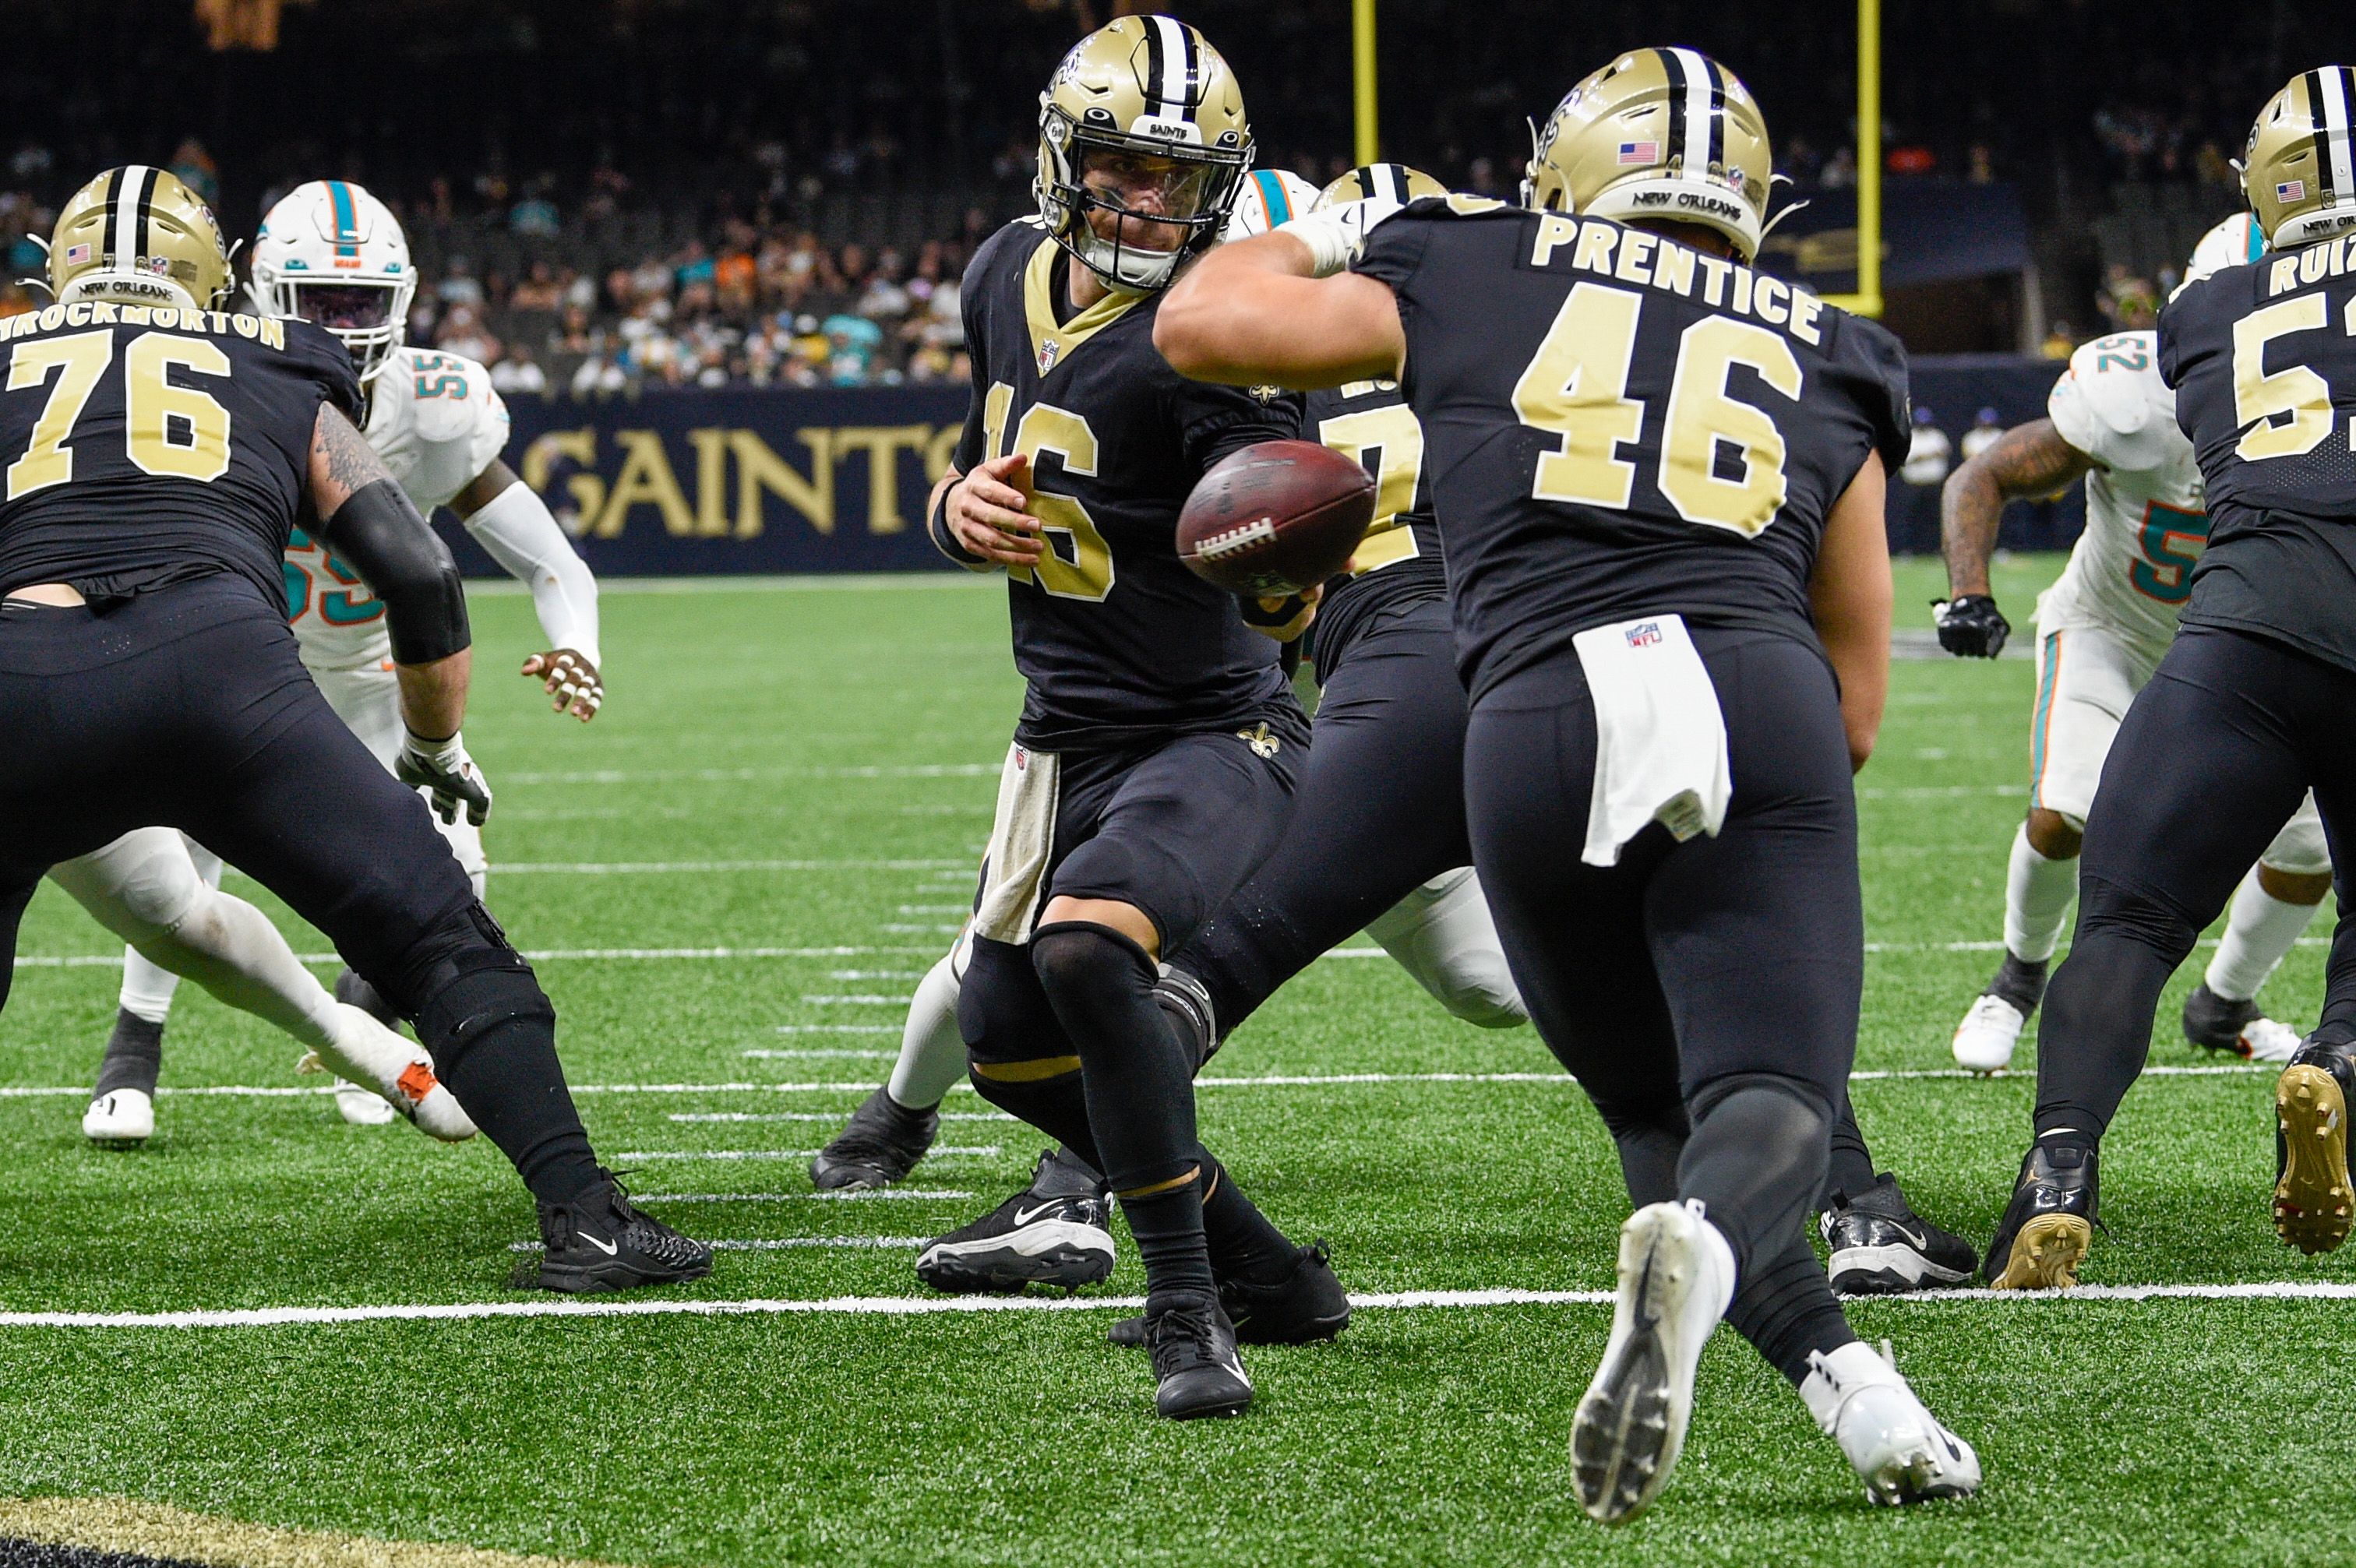 Miami Dolphins vs. New Orleans Saints MNF Preview